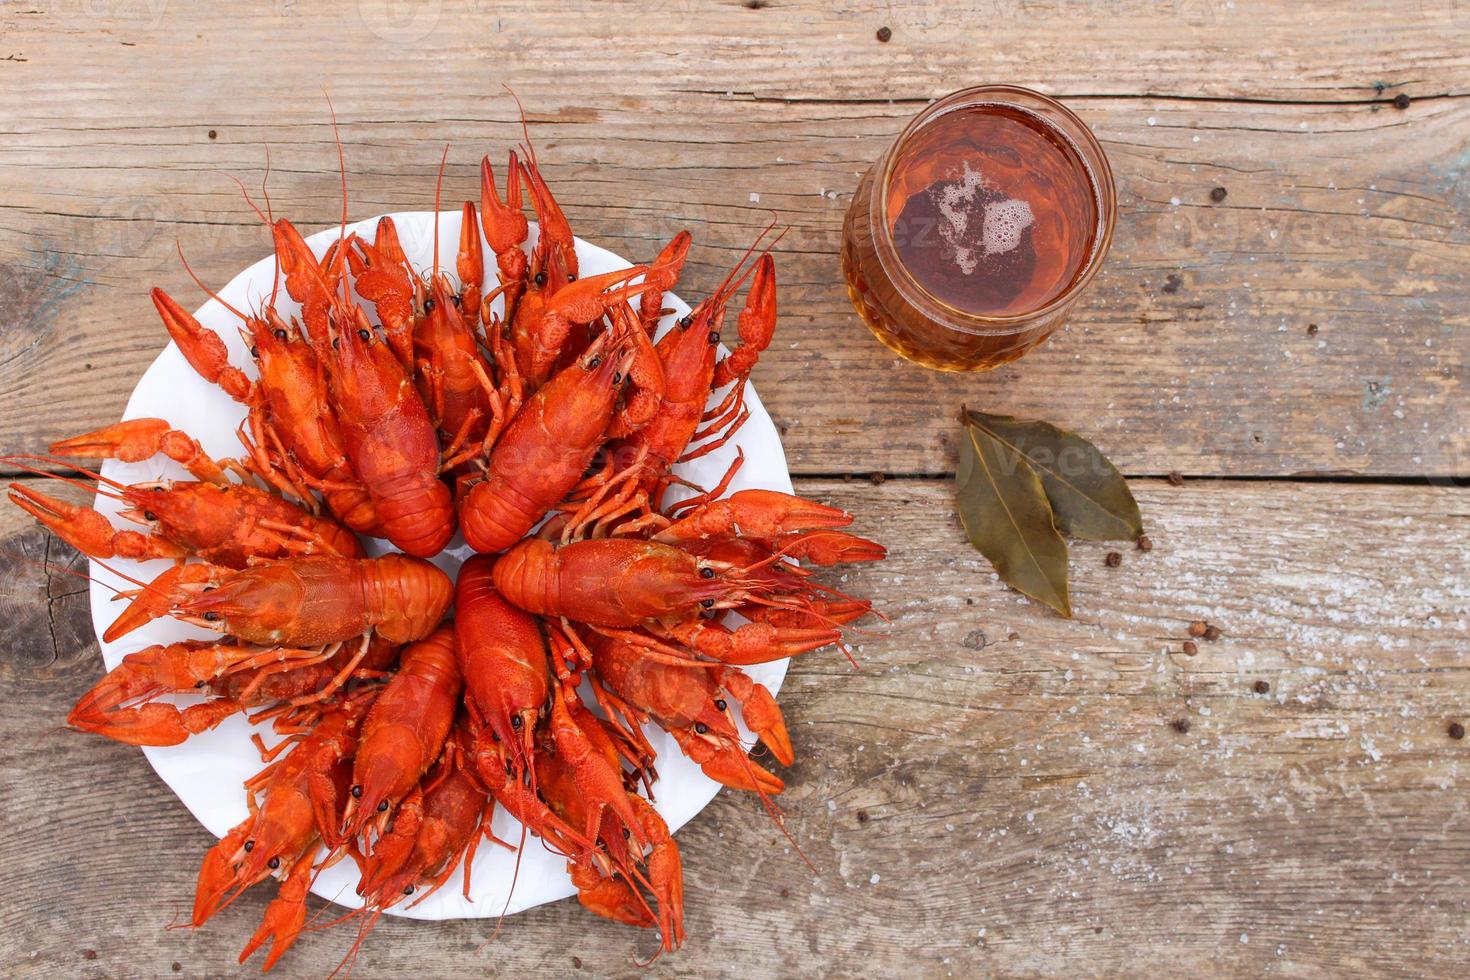 Crawfish and beer on the old wooden background. Top view. photo